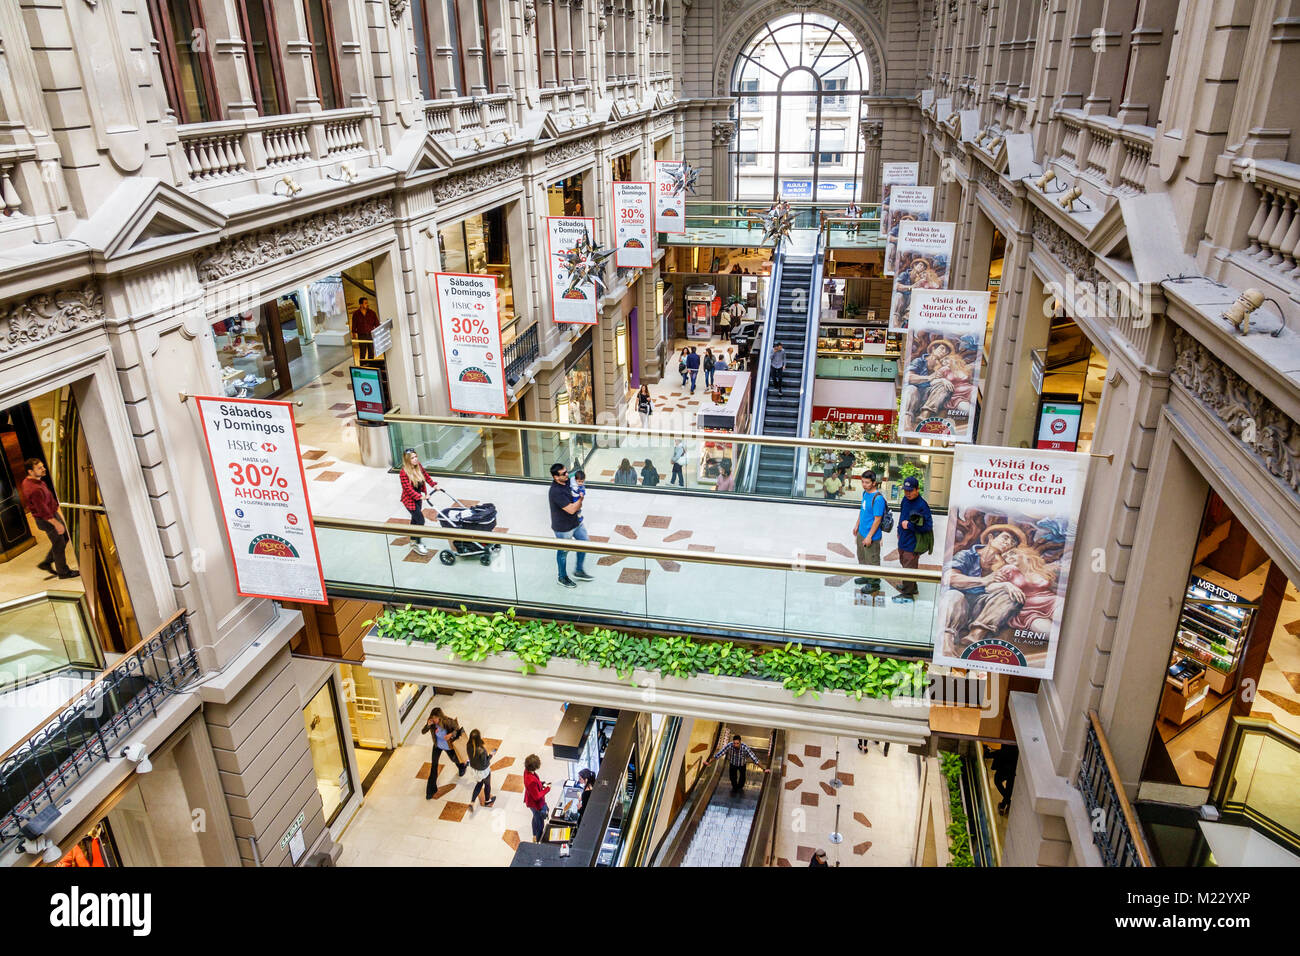 Buenos Aires Argentina,Galerias Pacifico mall,atrium,historic building,inside,overhead view,multiple levels,Hispanic,Argentinean Argentinian Argentine Stock Photo